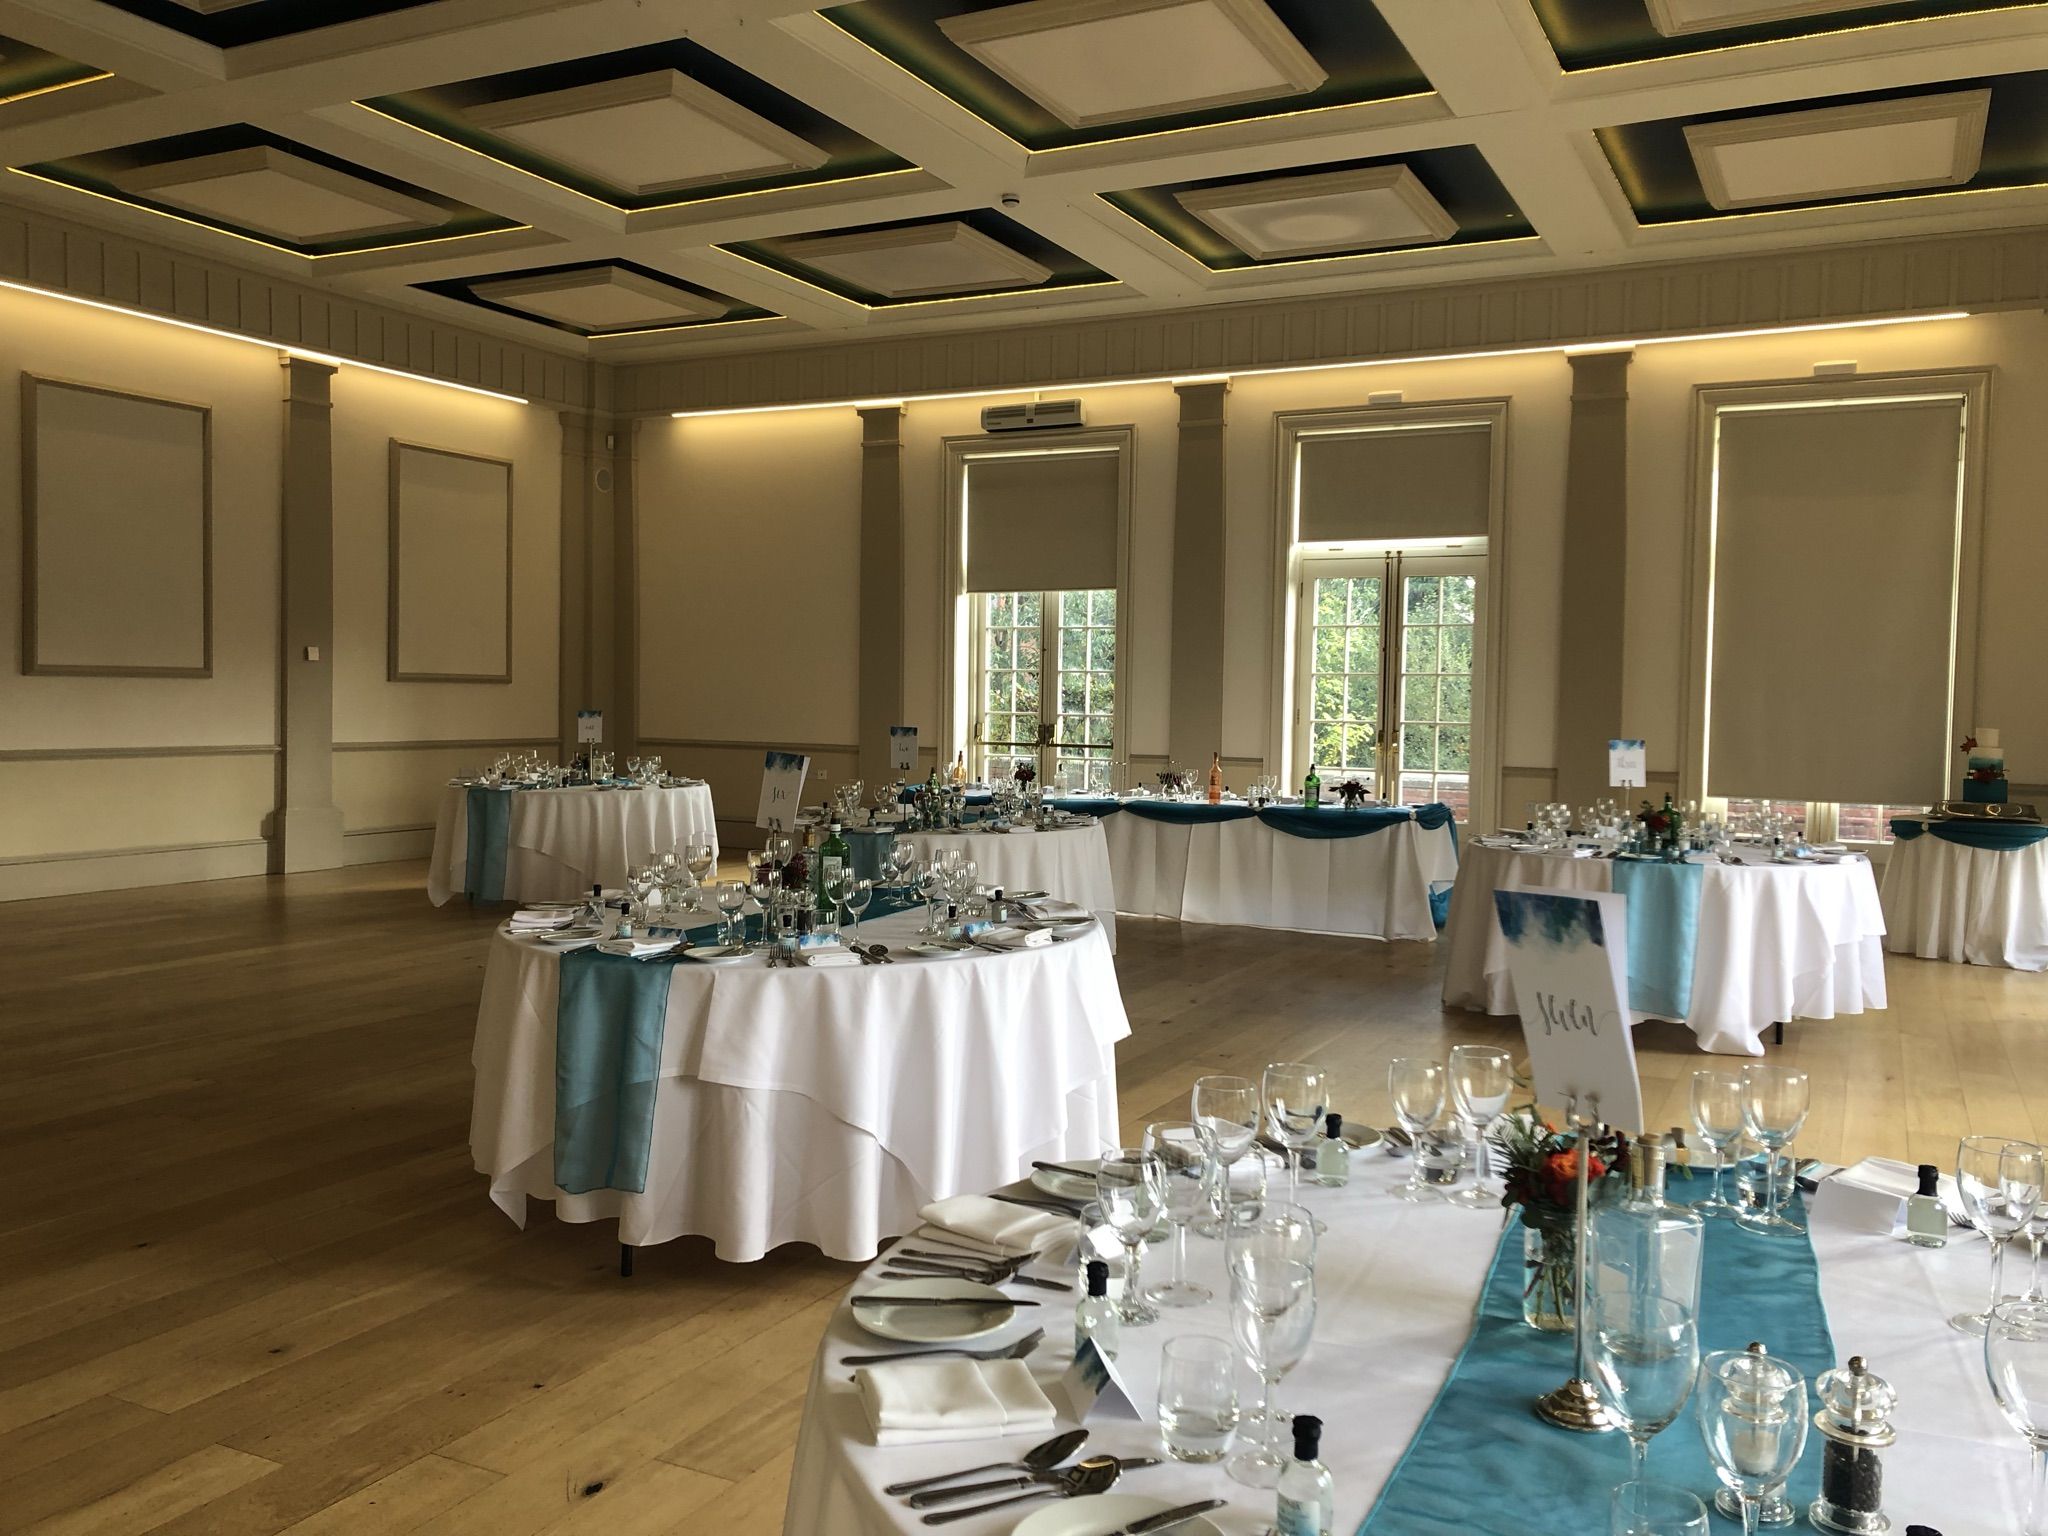 a banquet hall with tables and chairs covered in blue and white linens.